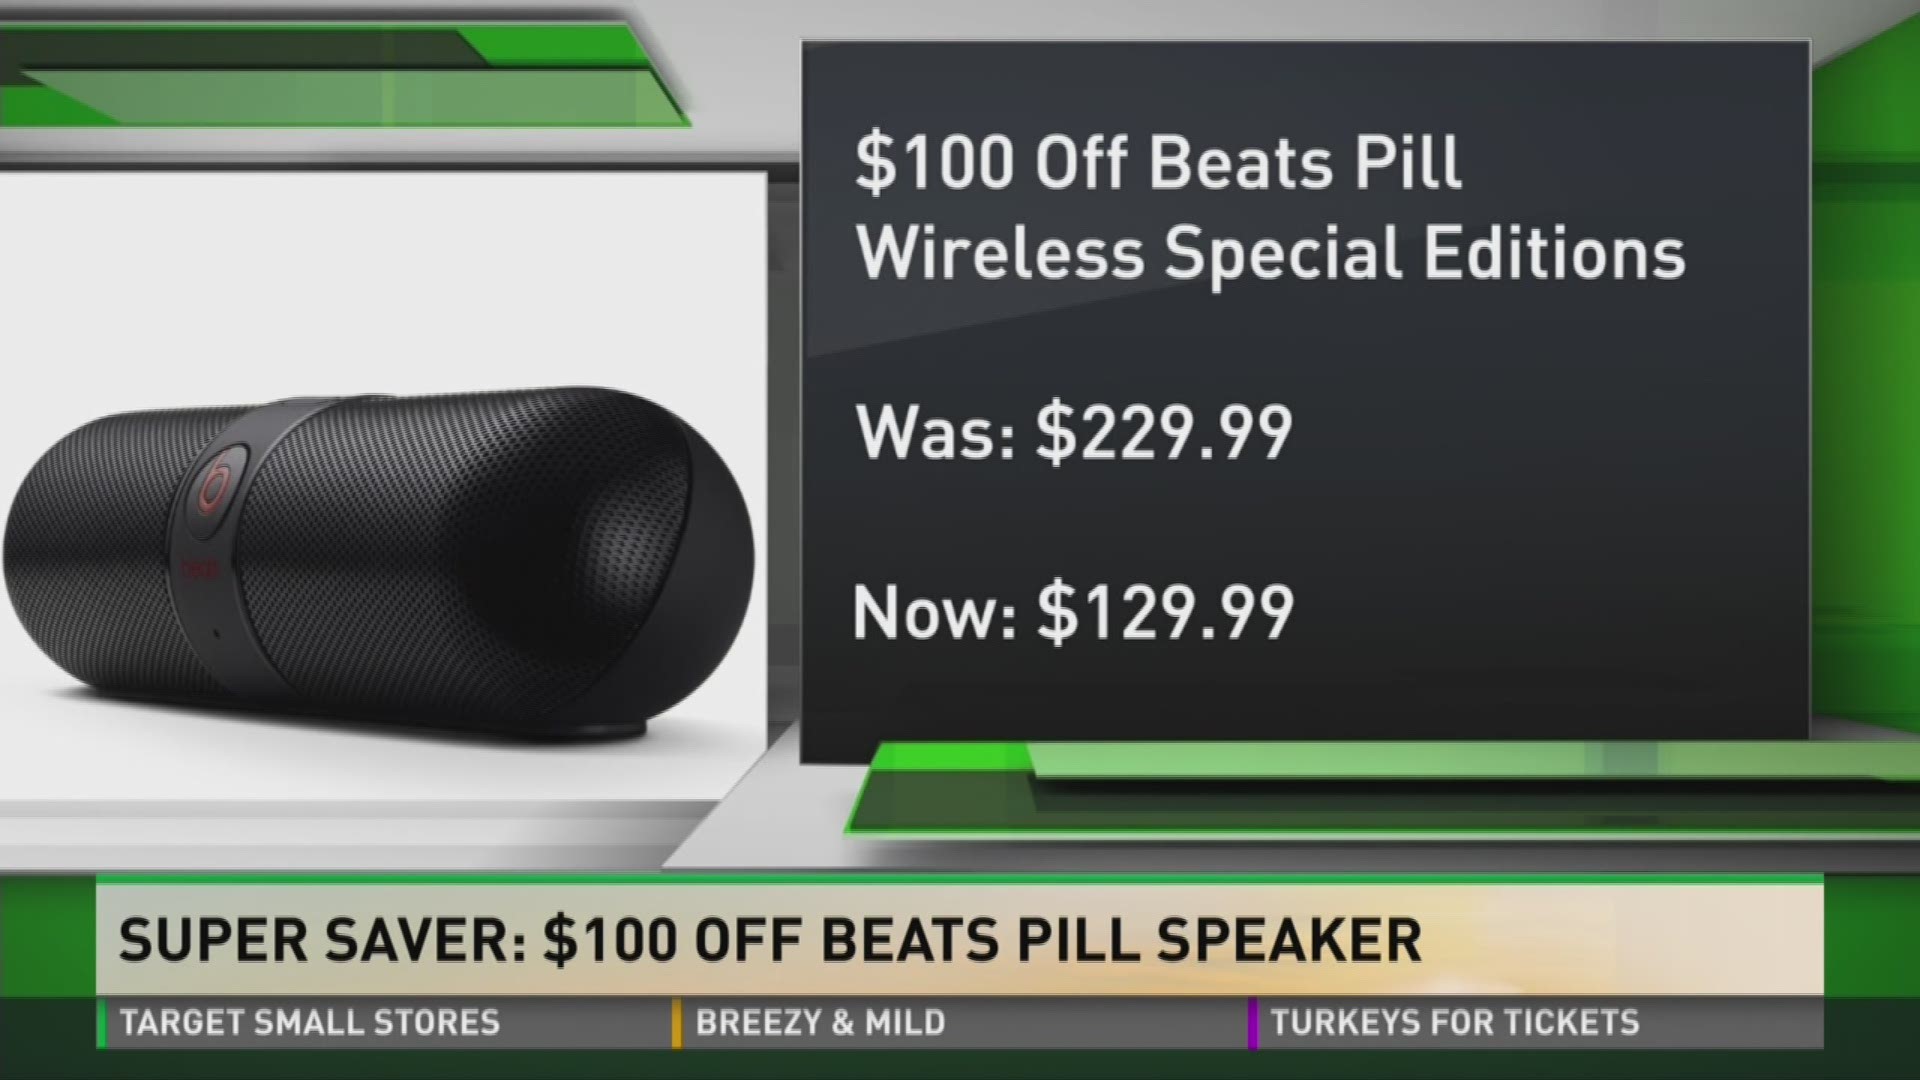 Matt Granite usually thinks Beats by Dre products are overrated and overpriced, but today he found $100 dollars off the Pill, which offers excellent, room-filling sound